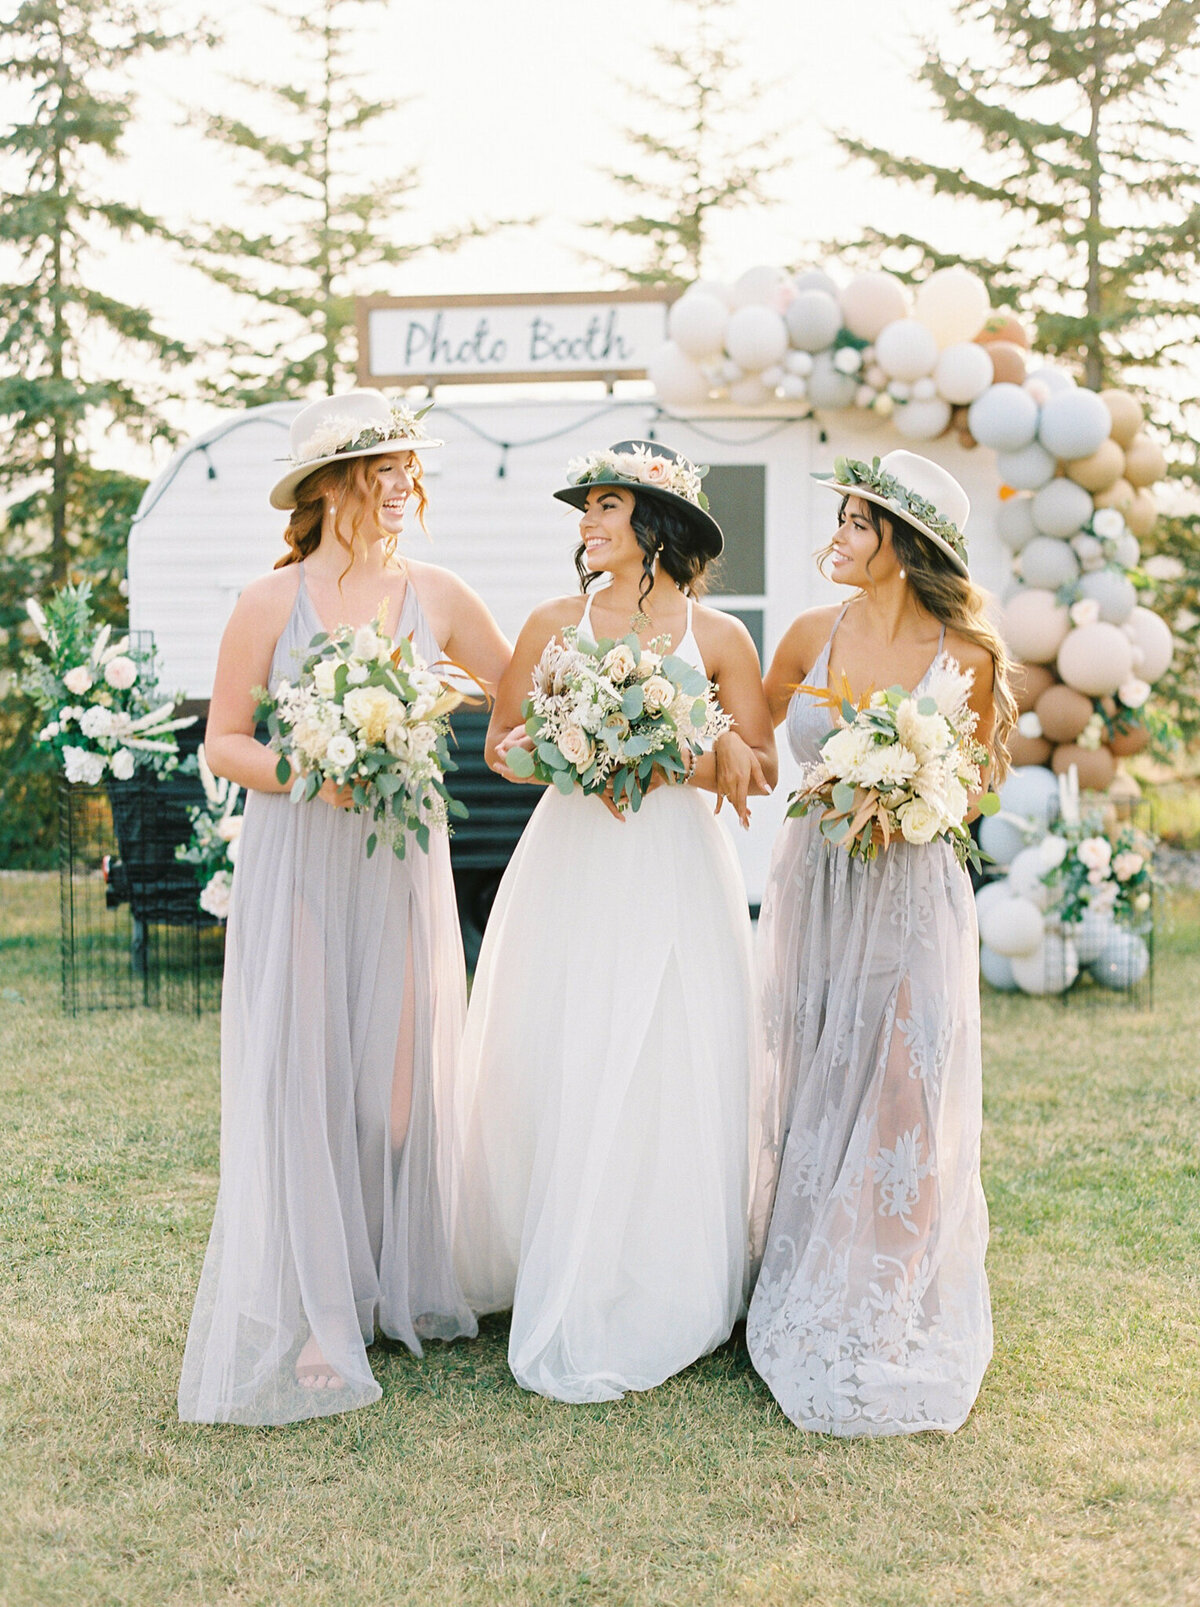 Gorgeous wedding inspiration, bride with bridesmaids wearing trendy wedding hats lined with florals and greenery in front of camper photo booth, captured by Justine Milton Photography, fine art  wedding photographer & videographer in Calgary Alberta. Featured on the Bronte Bride Vendor Guide.